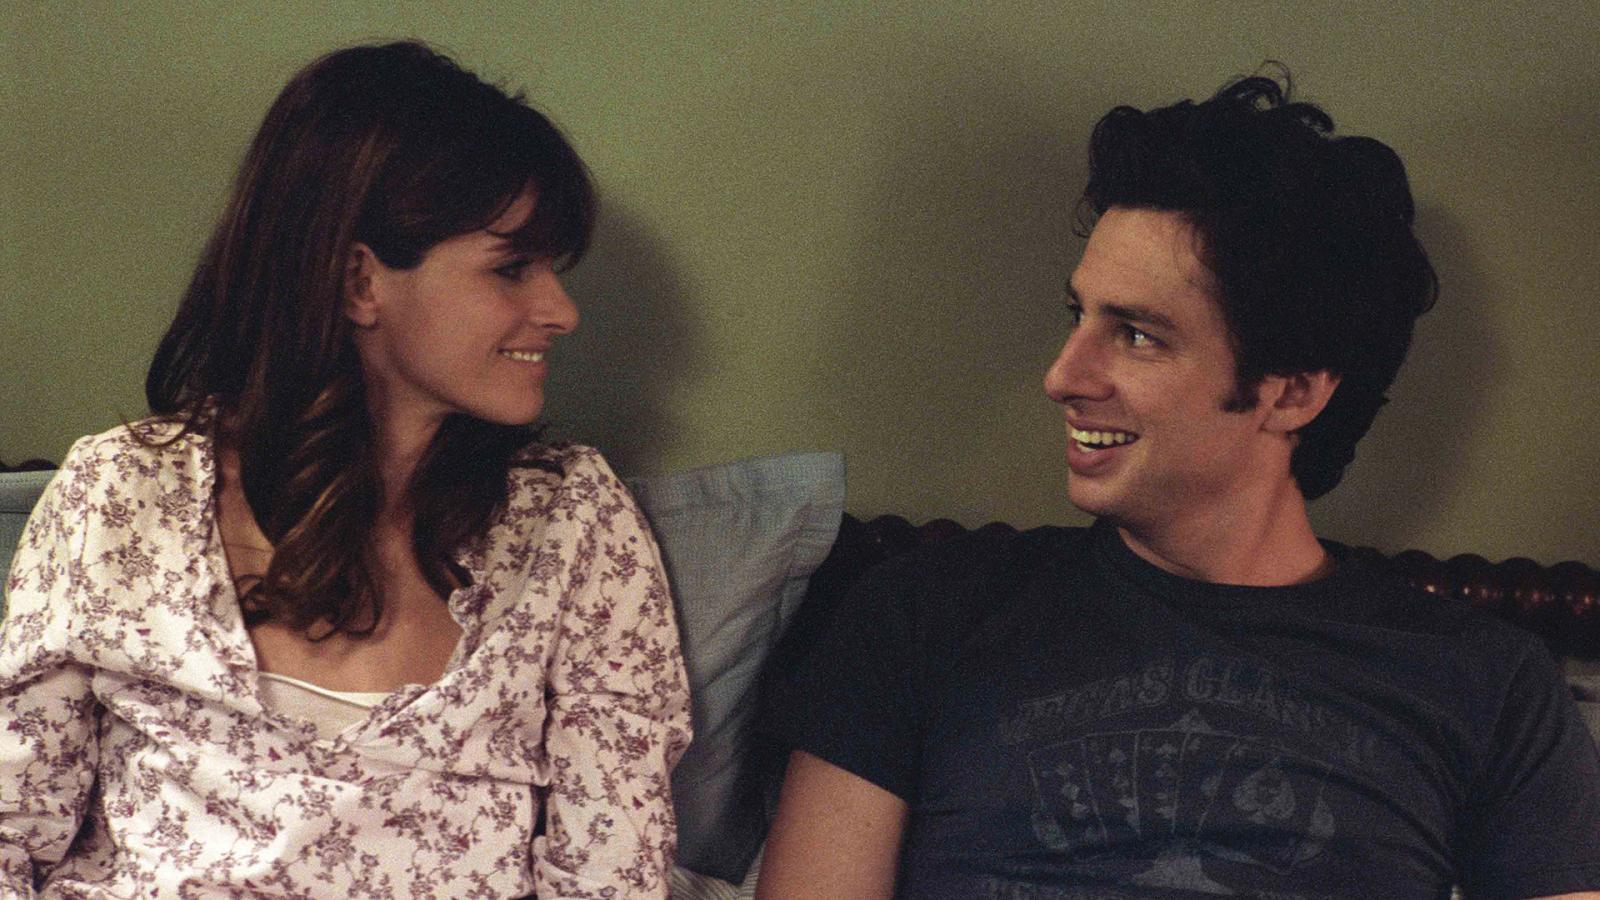 15 Unforgettable Romantic Comedies of the 2000s You Might Have Missed - image 8